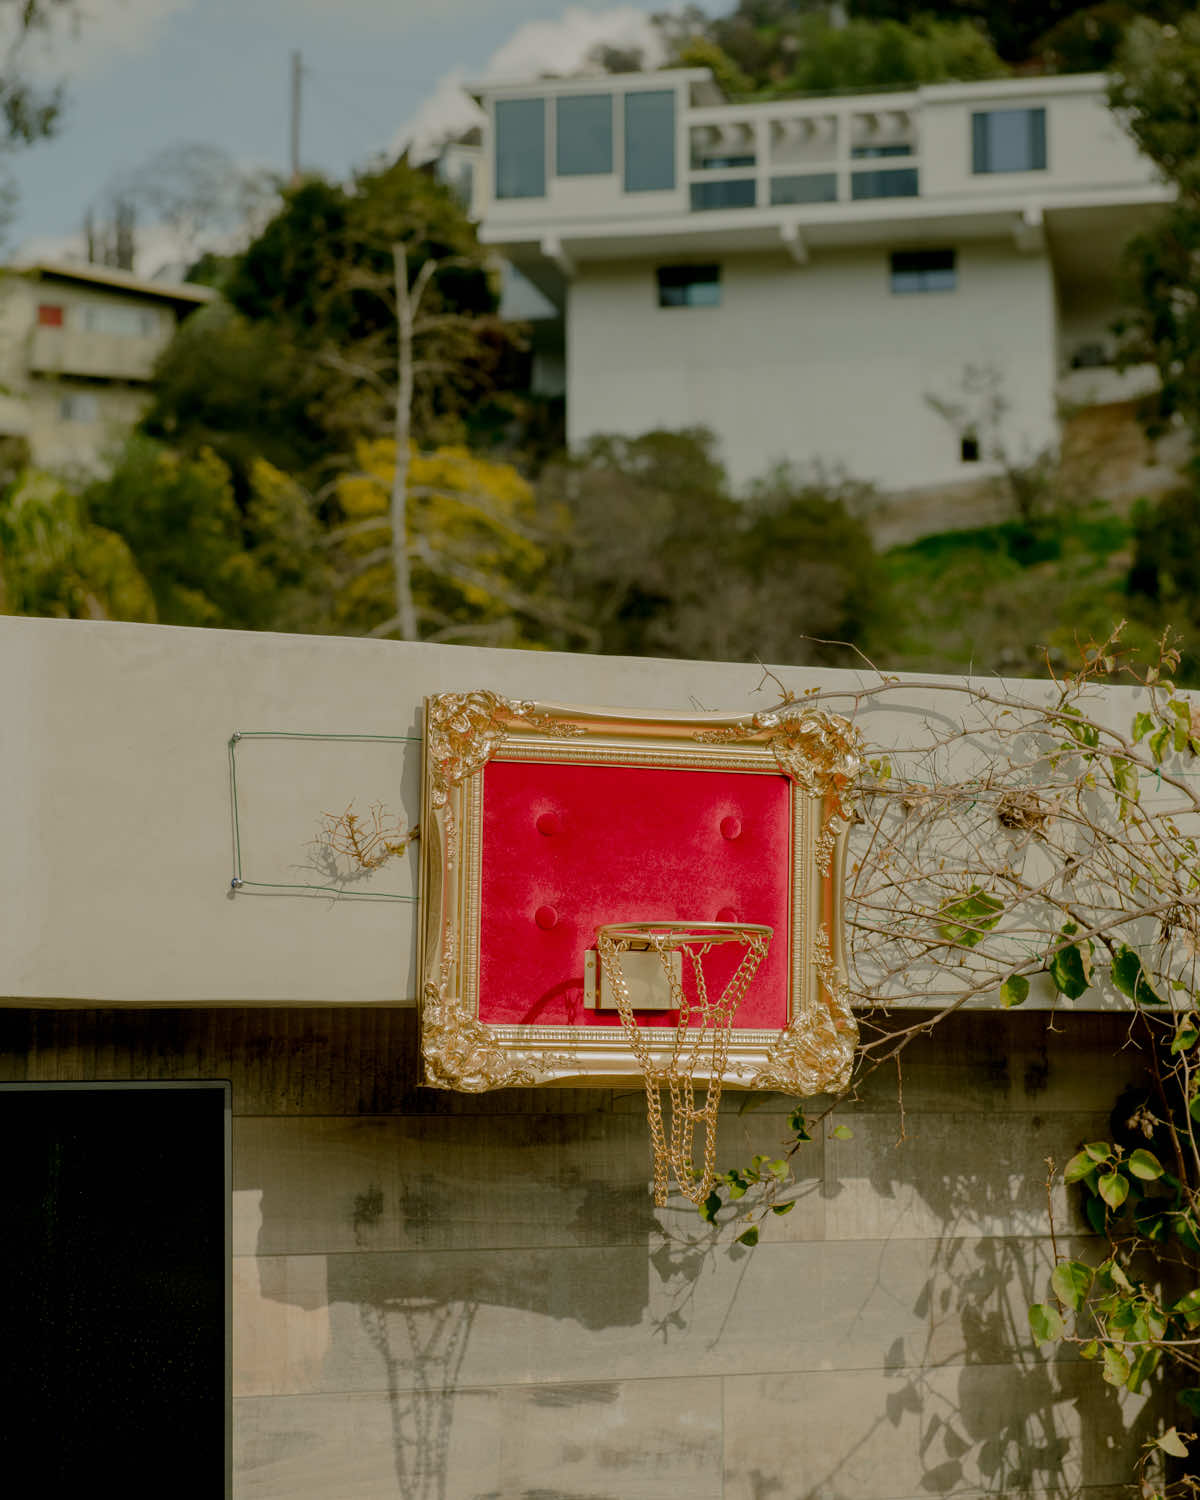 A basketball hoop with a red frame.